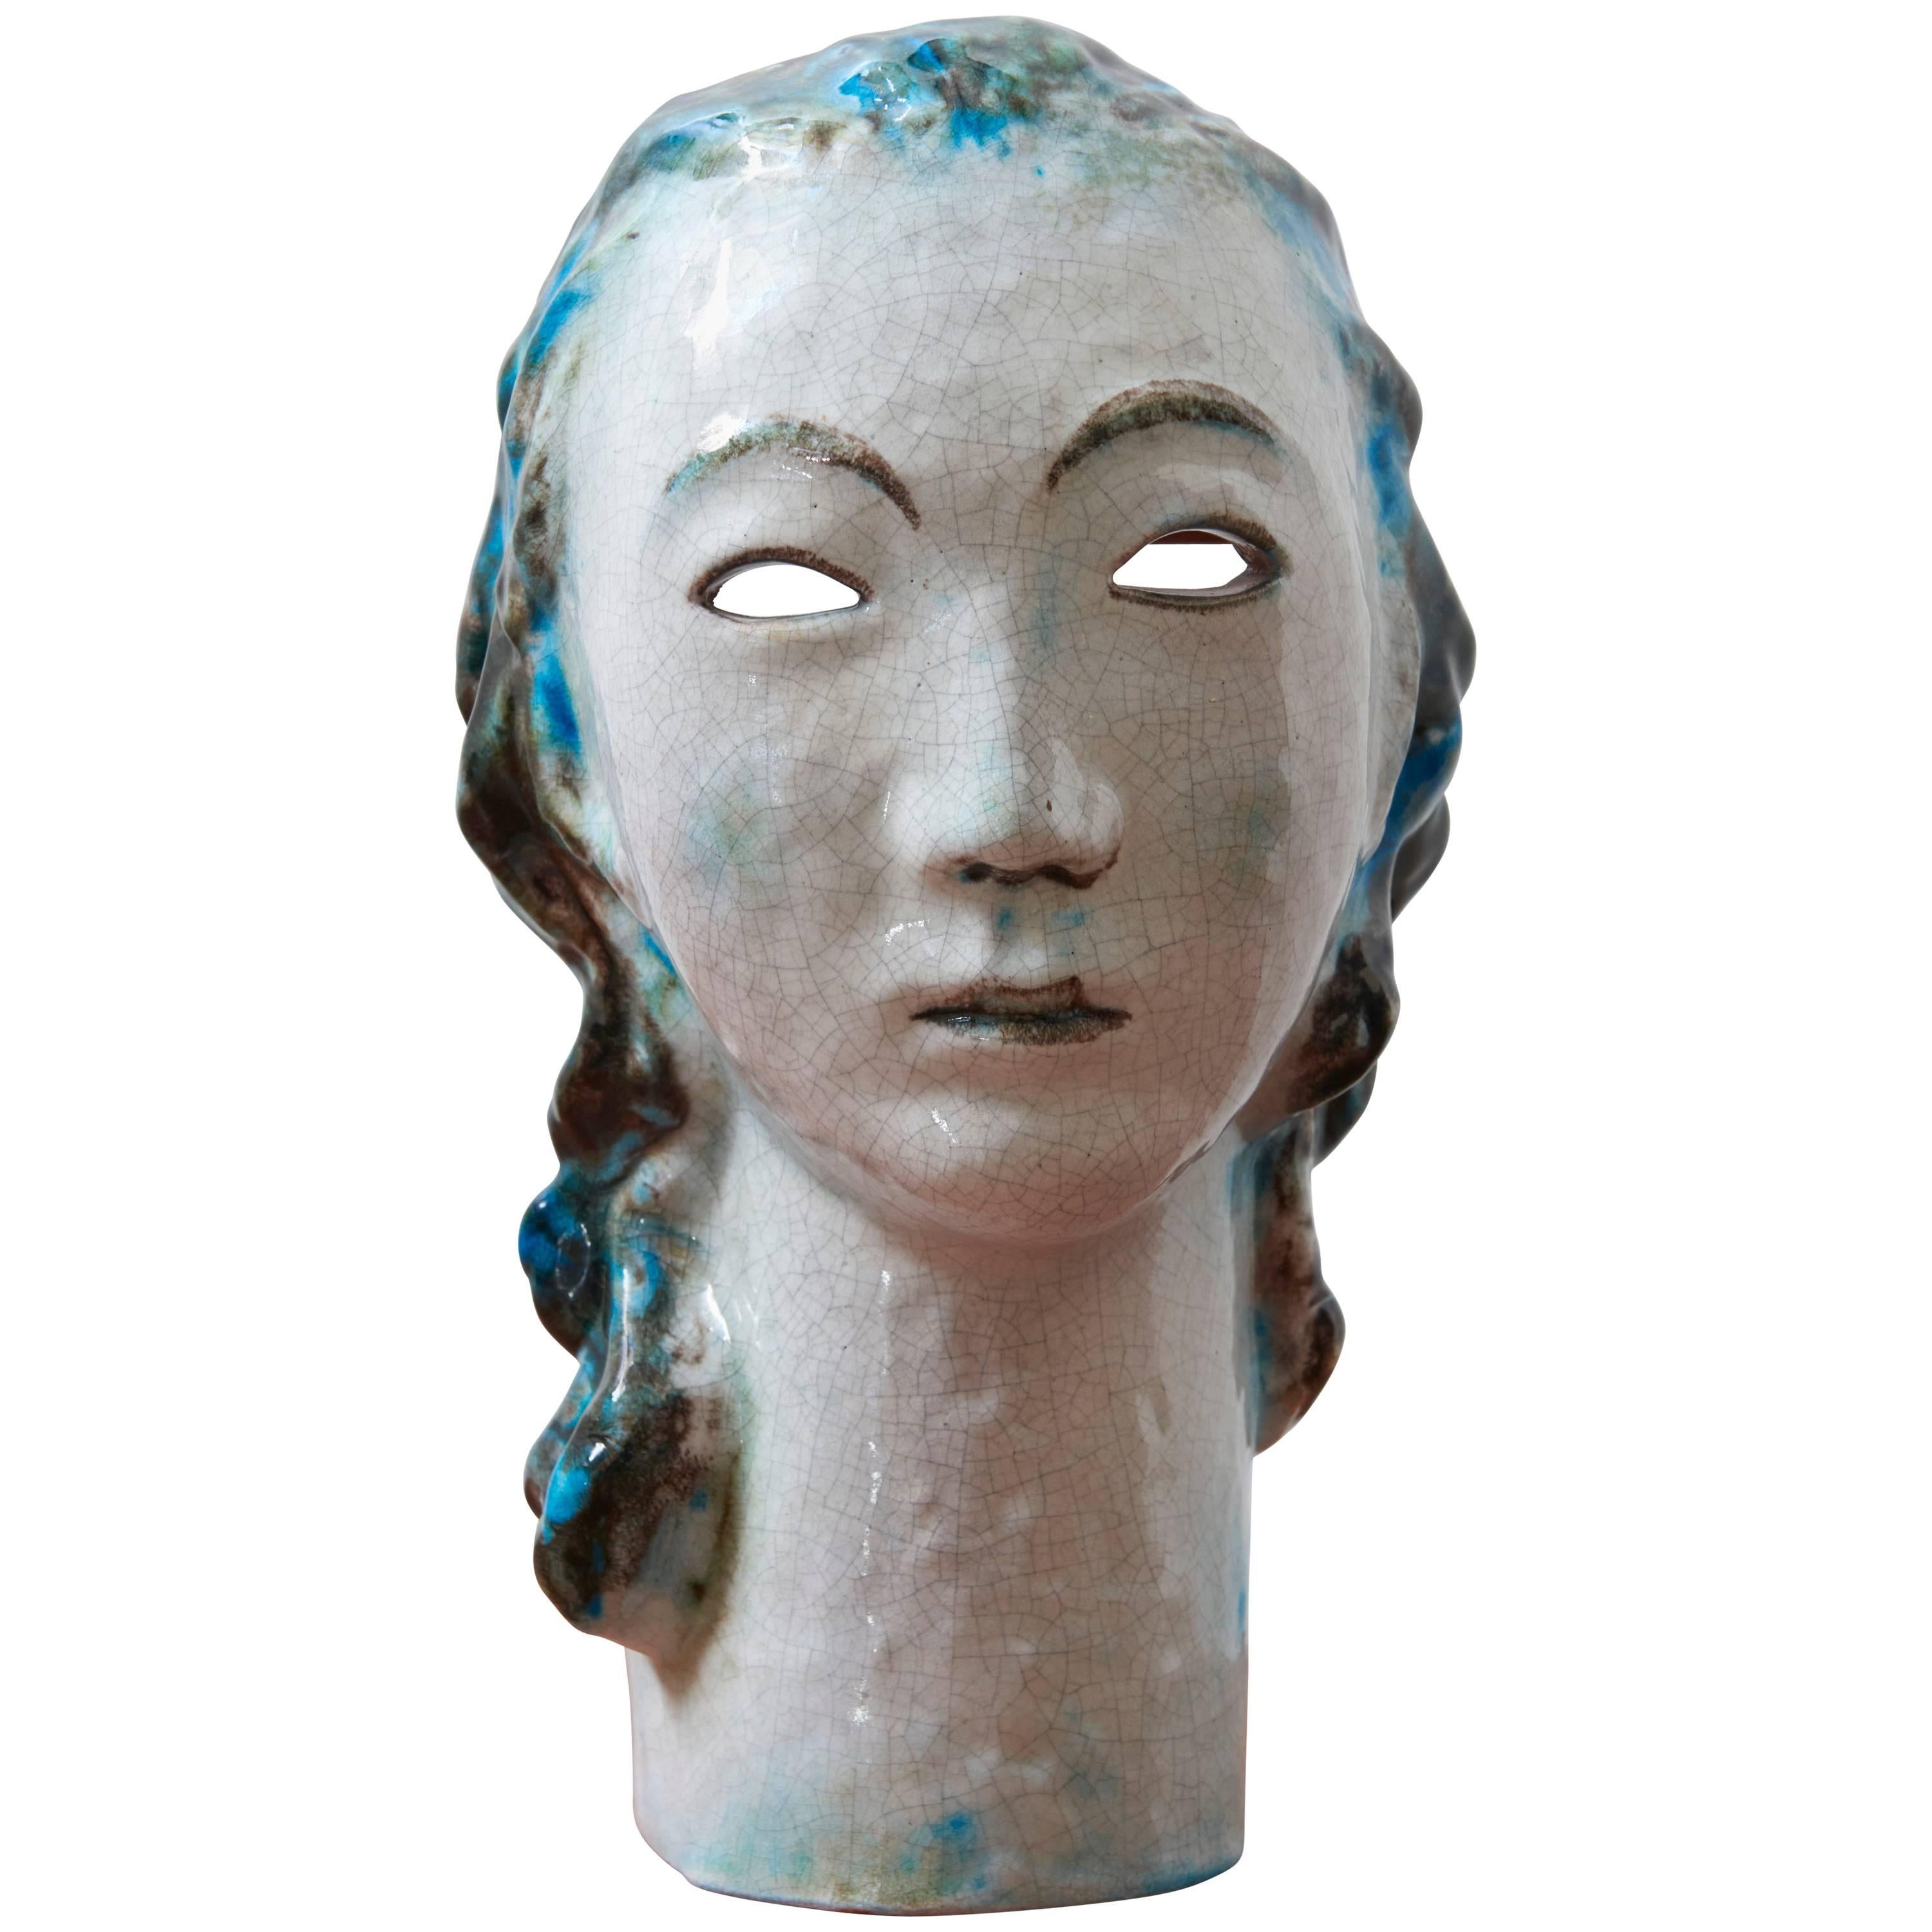 Unique Ceramic Portret Buste, Girl with Blue Hair by Erwin Spuler 1930s, Germany For Sale